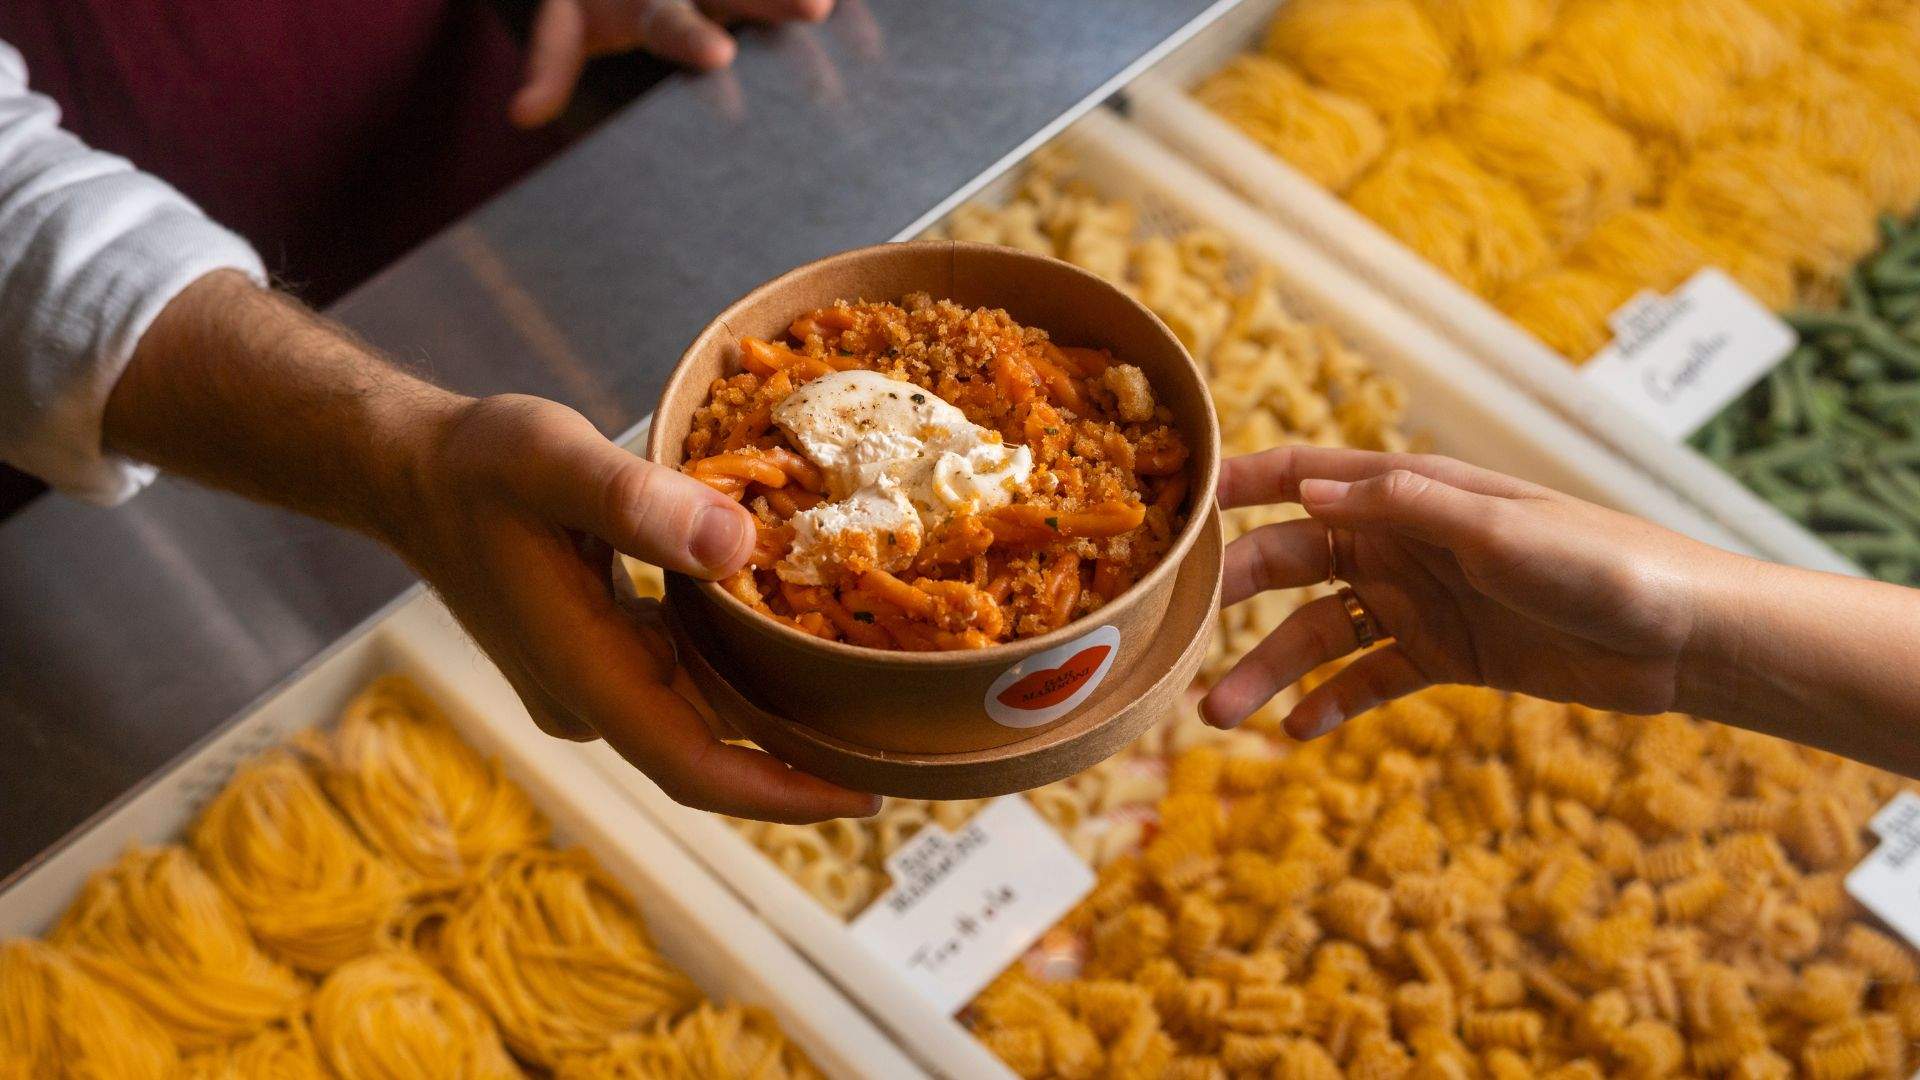 Quay Quarter's Bar Mammoni Is Now Slinging Made-to-Order Pasta Bowls and Fresh Deli Goods